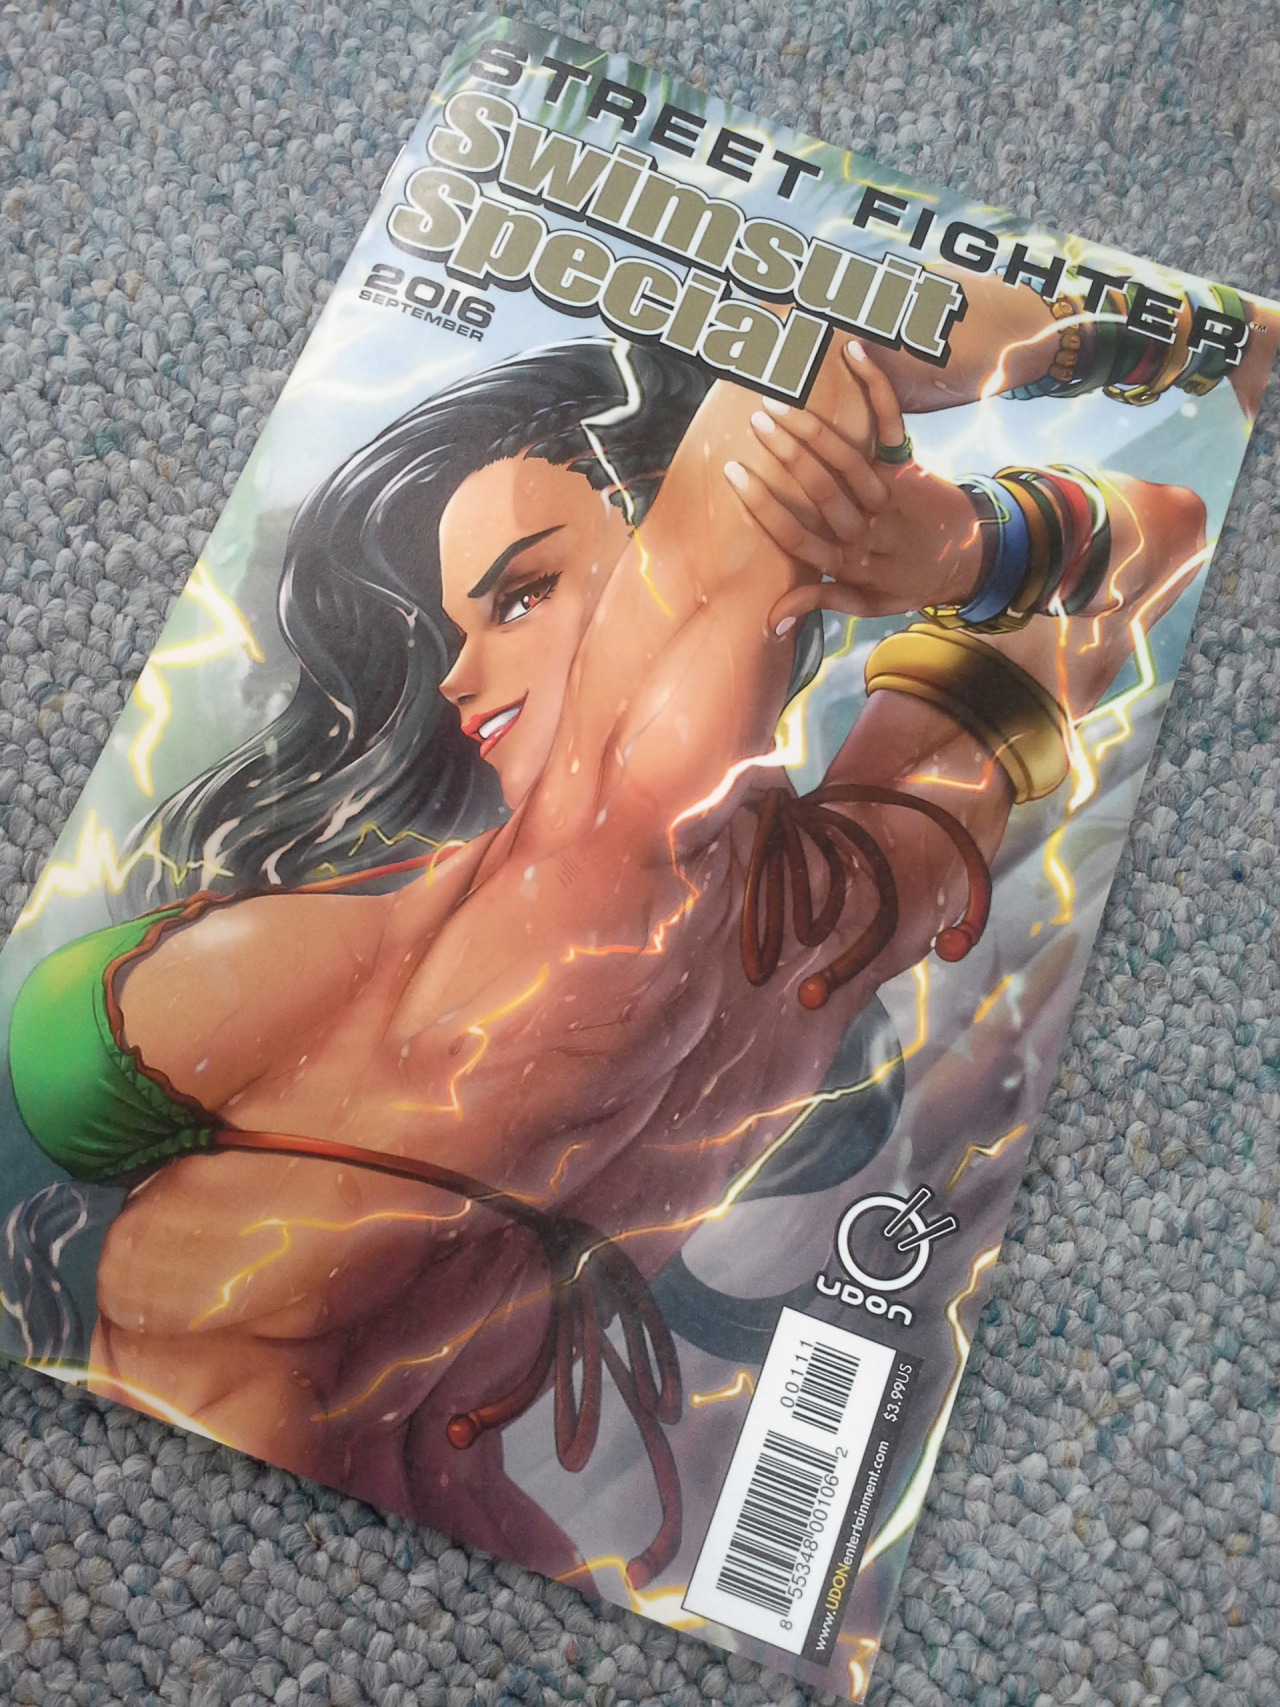   Picked up the Street Fighter Swimsuit Special with Ecchi-Star’s Laura cover at